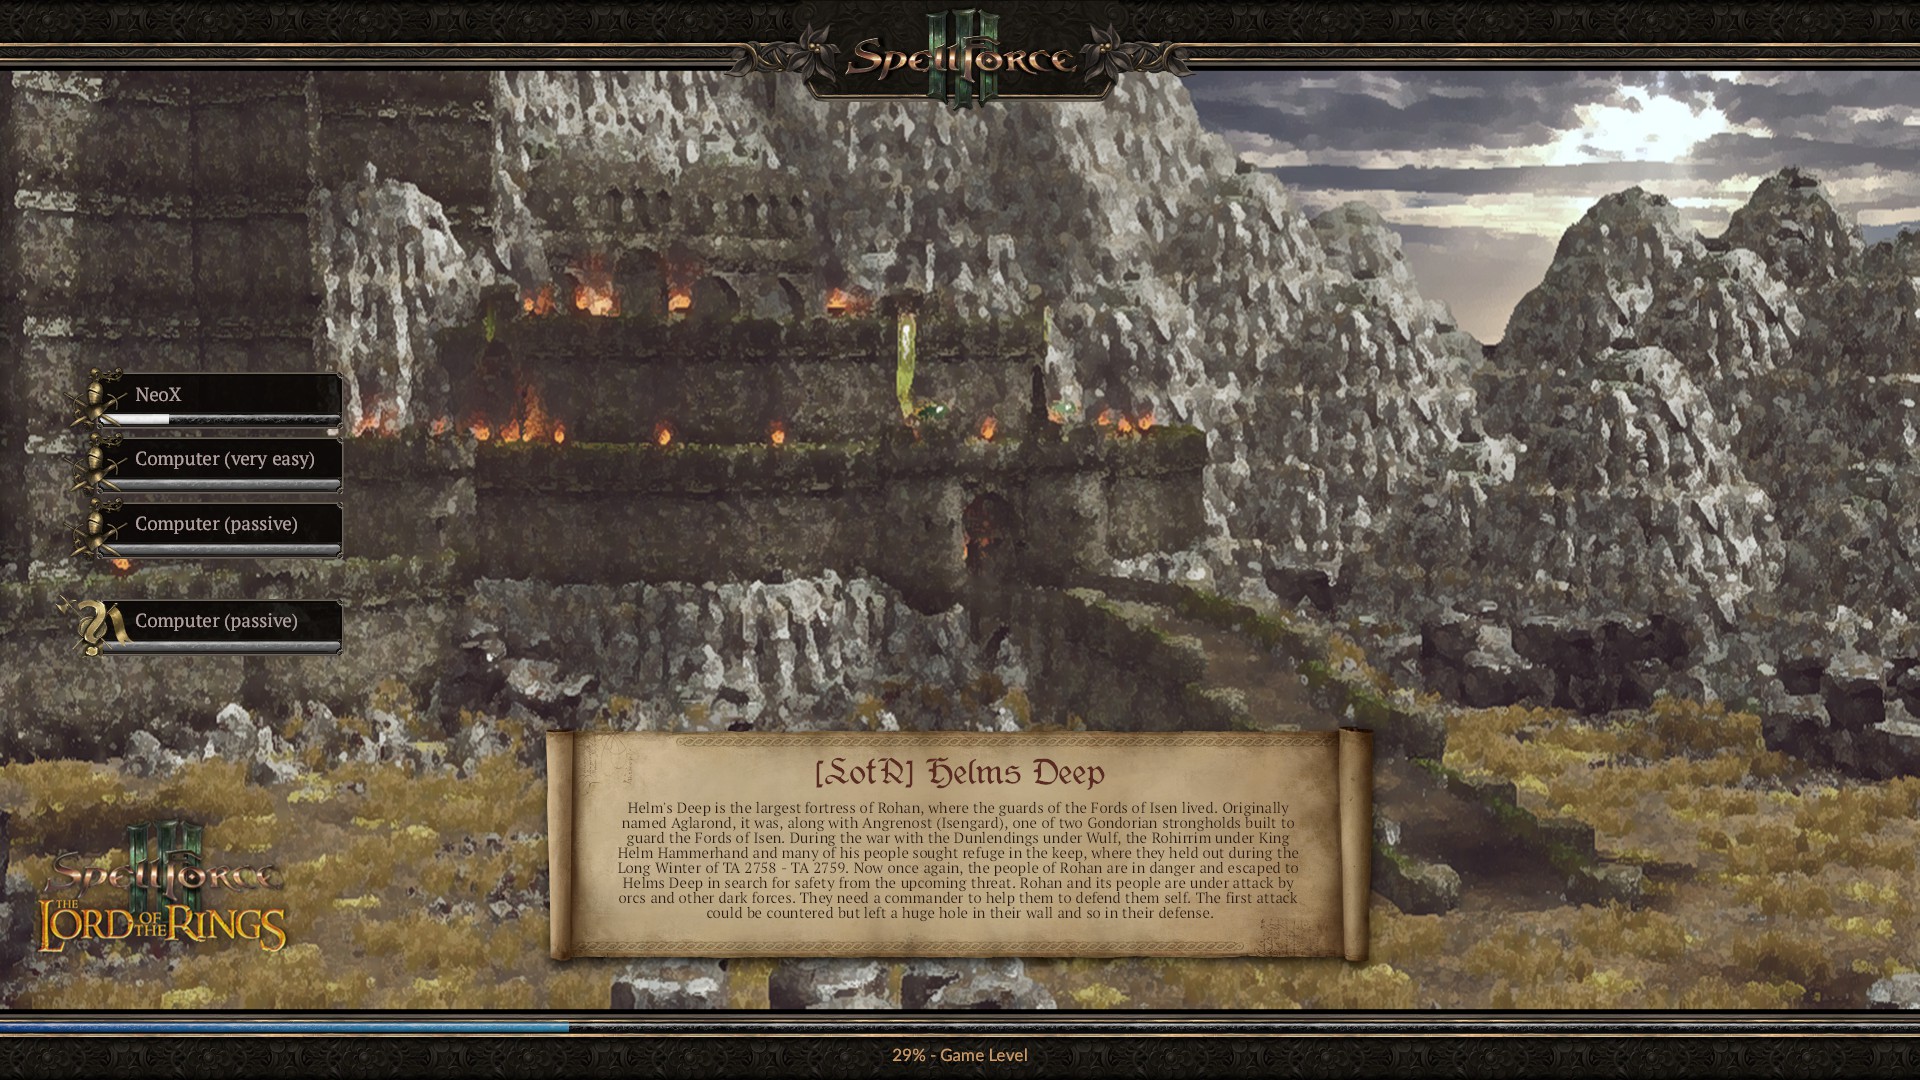 Ingame screenshot of the finished Helms Deep Episode loading screen with Coop-Mode